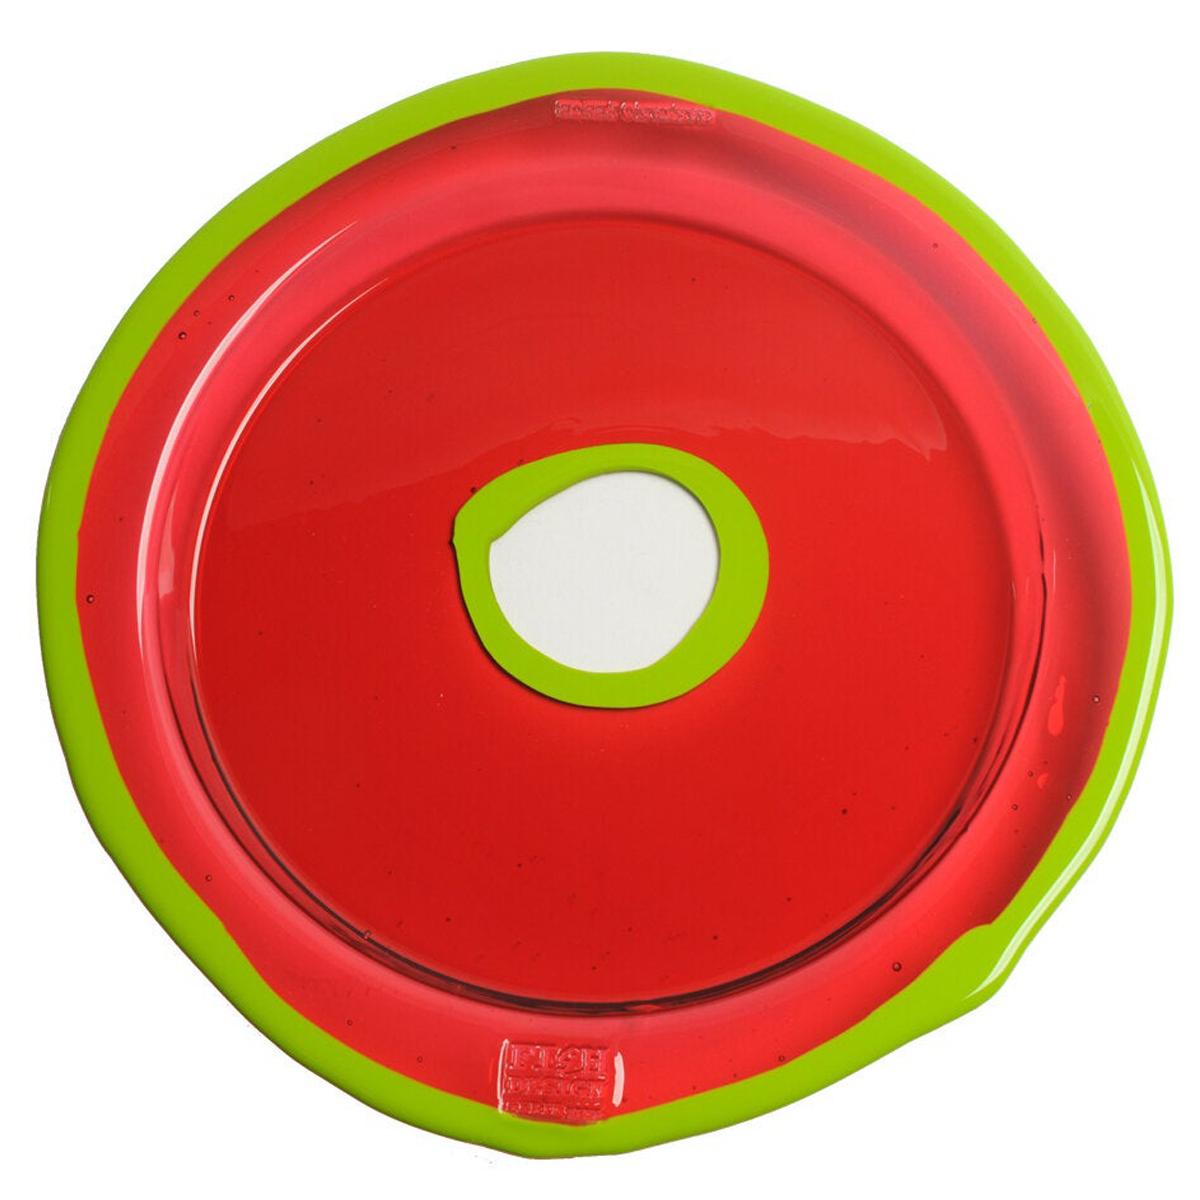 Try-Tray Large Round Tray in Dark Ruby and Matt Acid Green by Gaetano Pesce For Sale